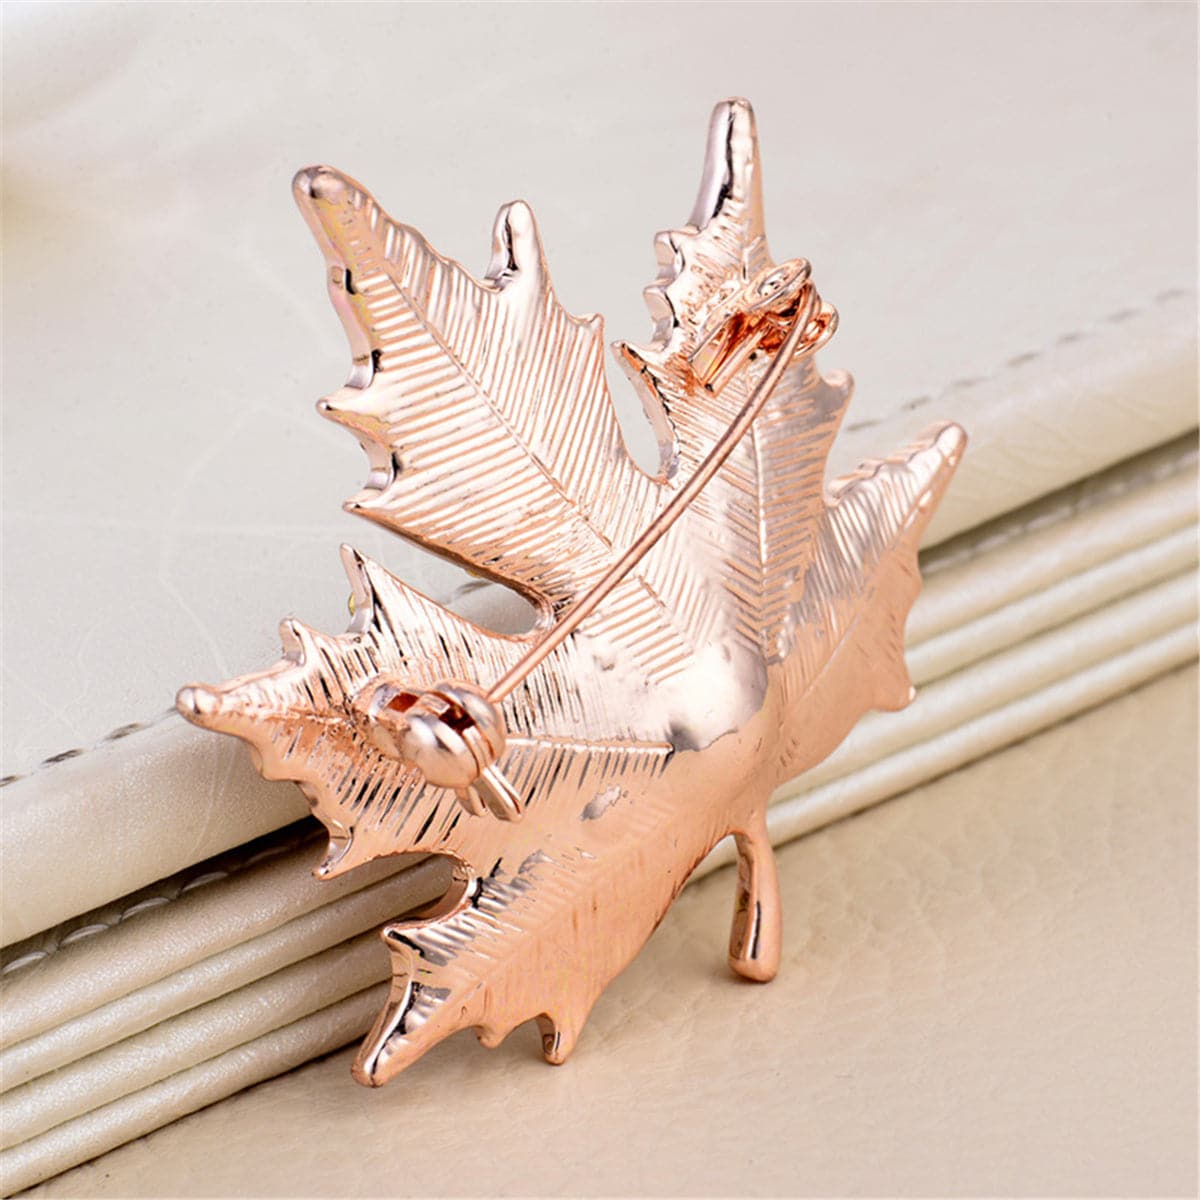 Pearl & Cubic Zirconia 18K Gold-Plated Maple Leaf Brooch